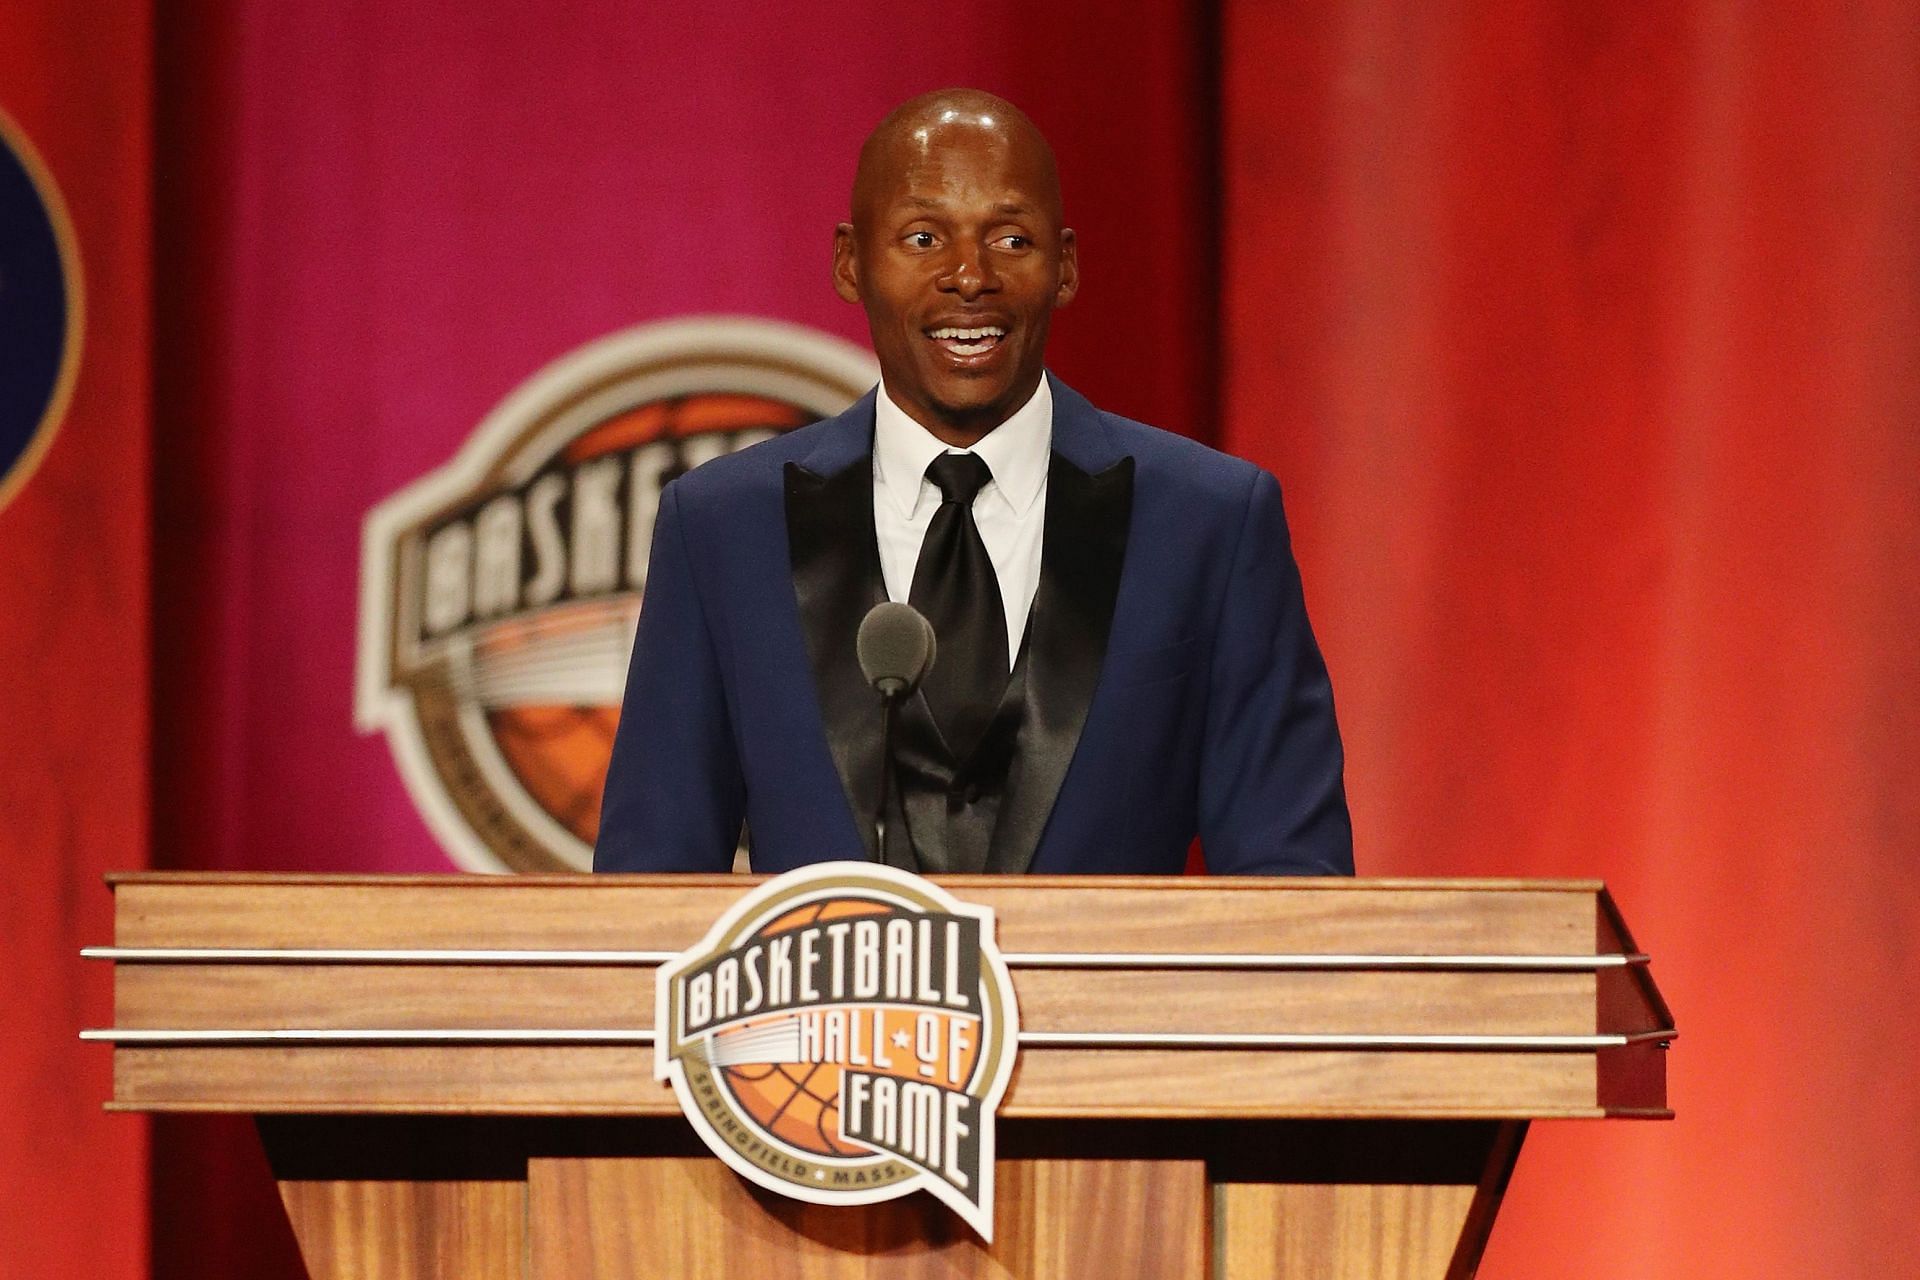 Ray Allen at the 2018 Basketball Hall of Fame Enshrinement Ceremony